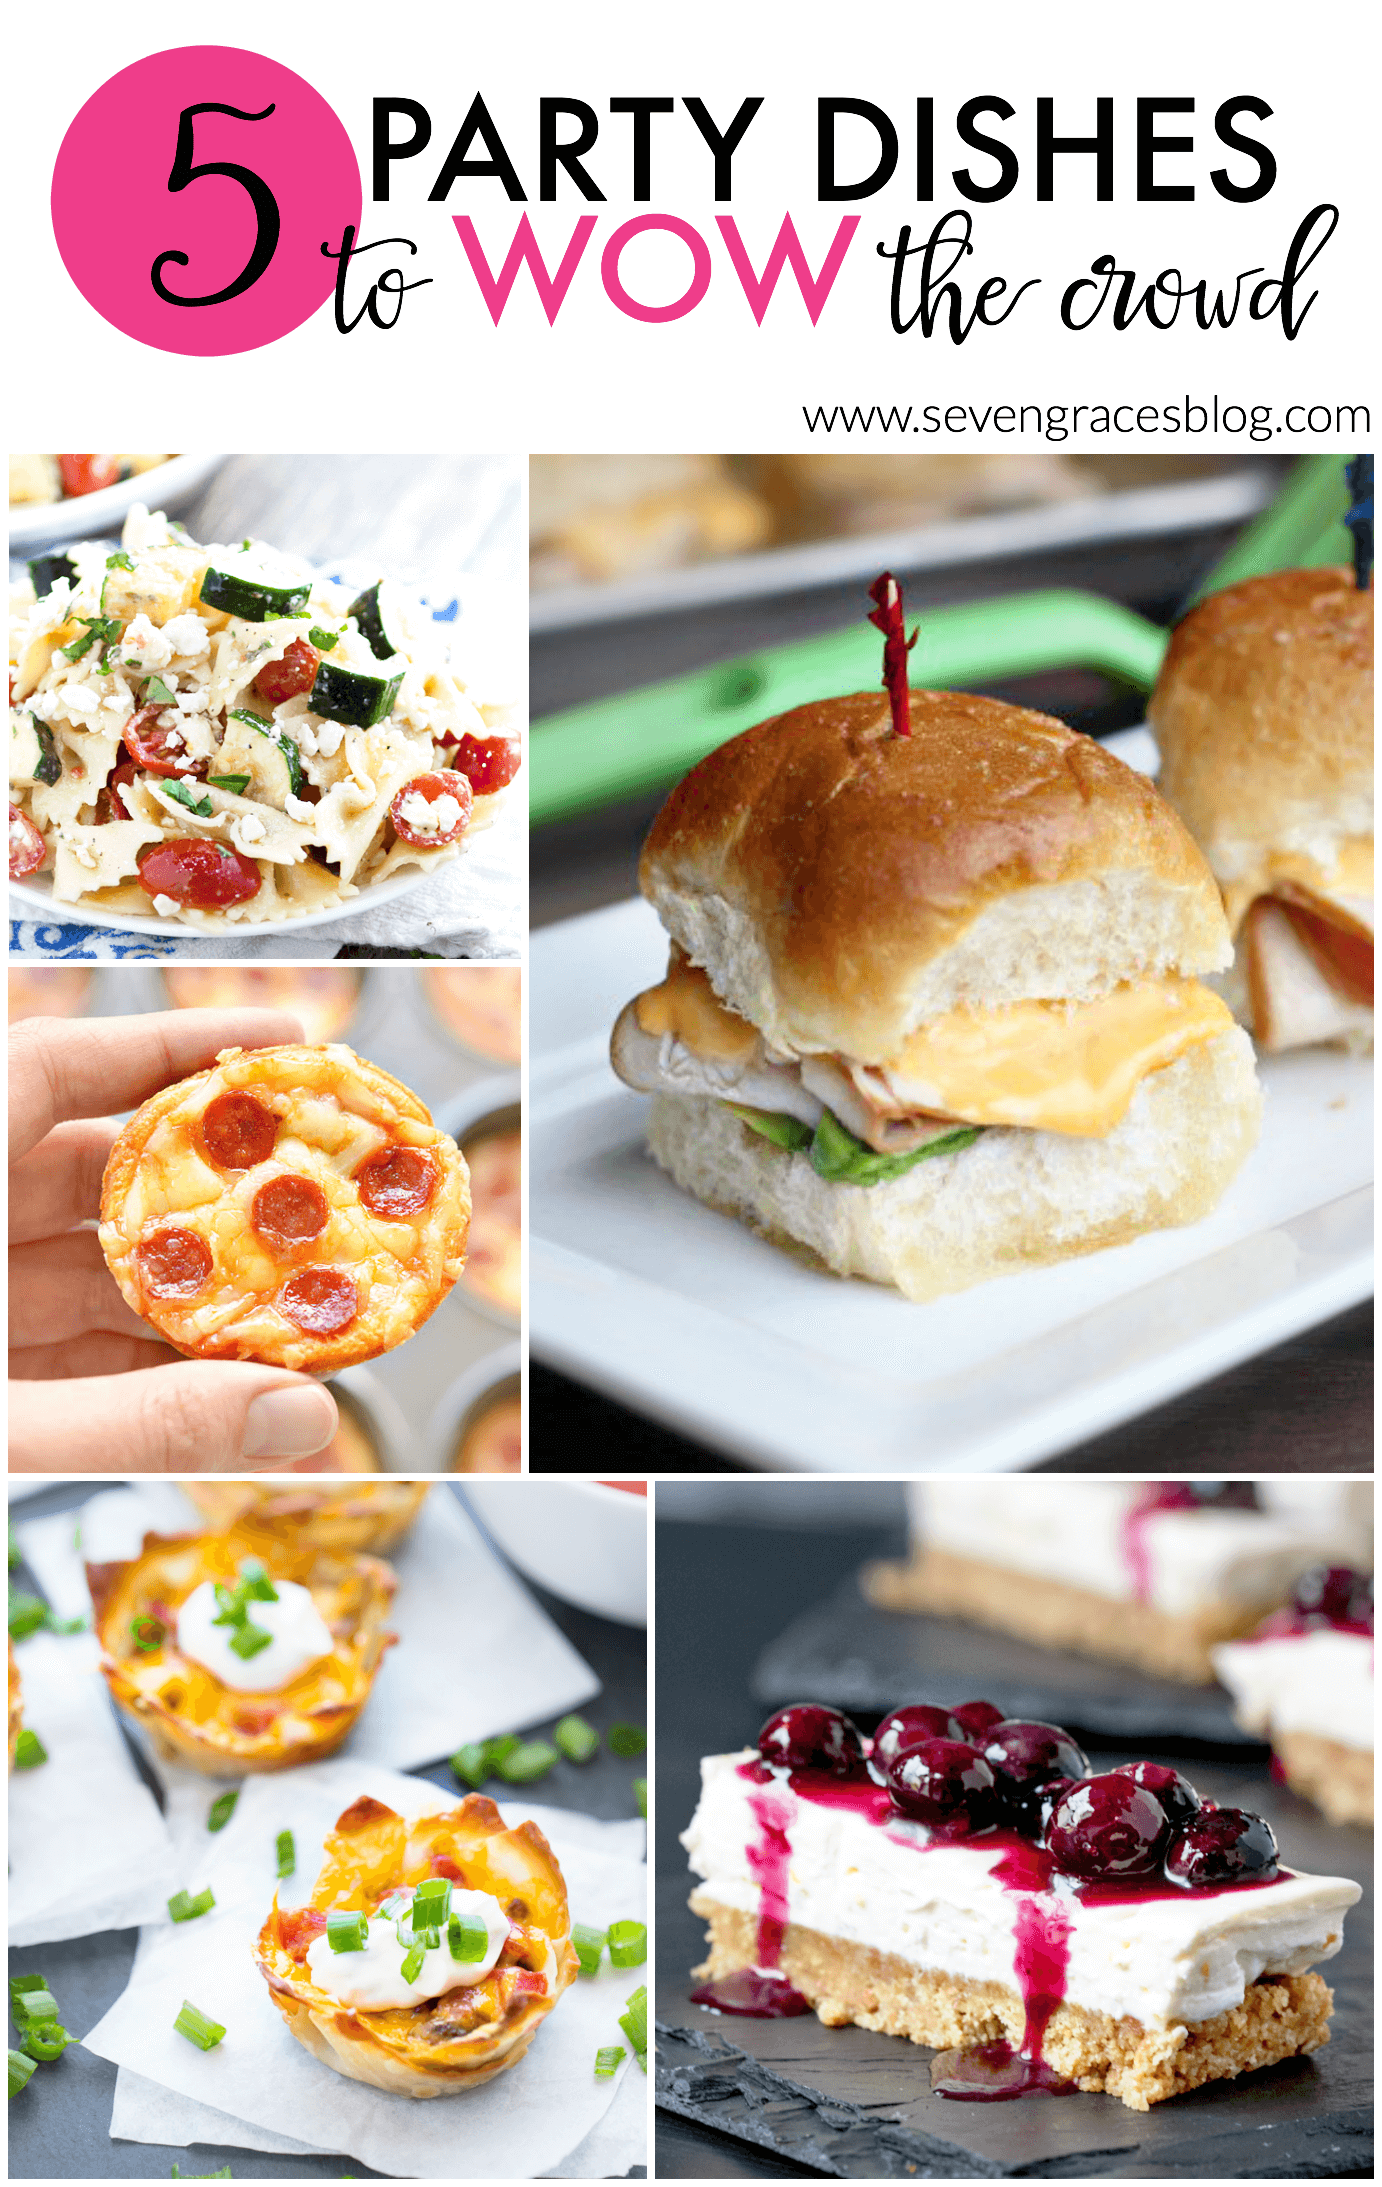 5 party dishes to wow the crowd. Take these best appetizers to a summer party, tailgate party, or a fun potluck. These recipes look delicious!